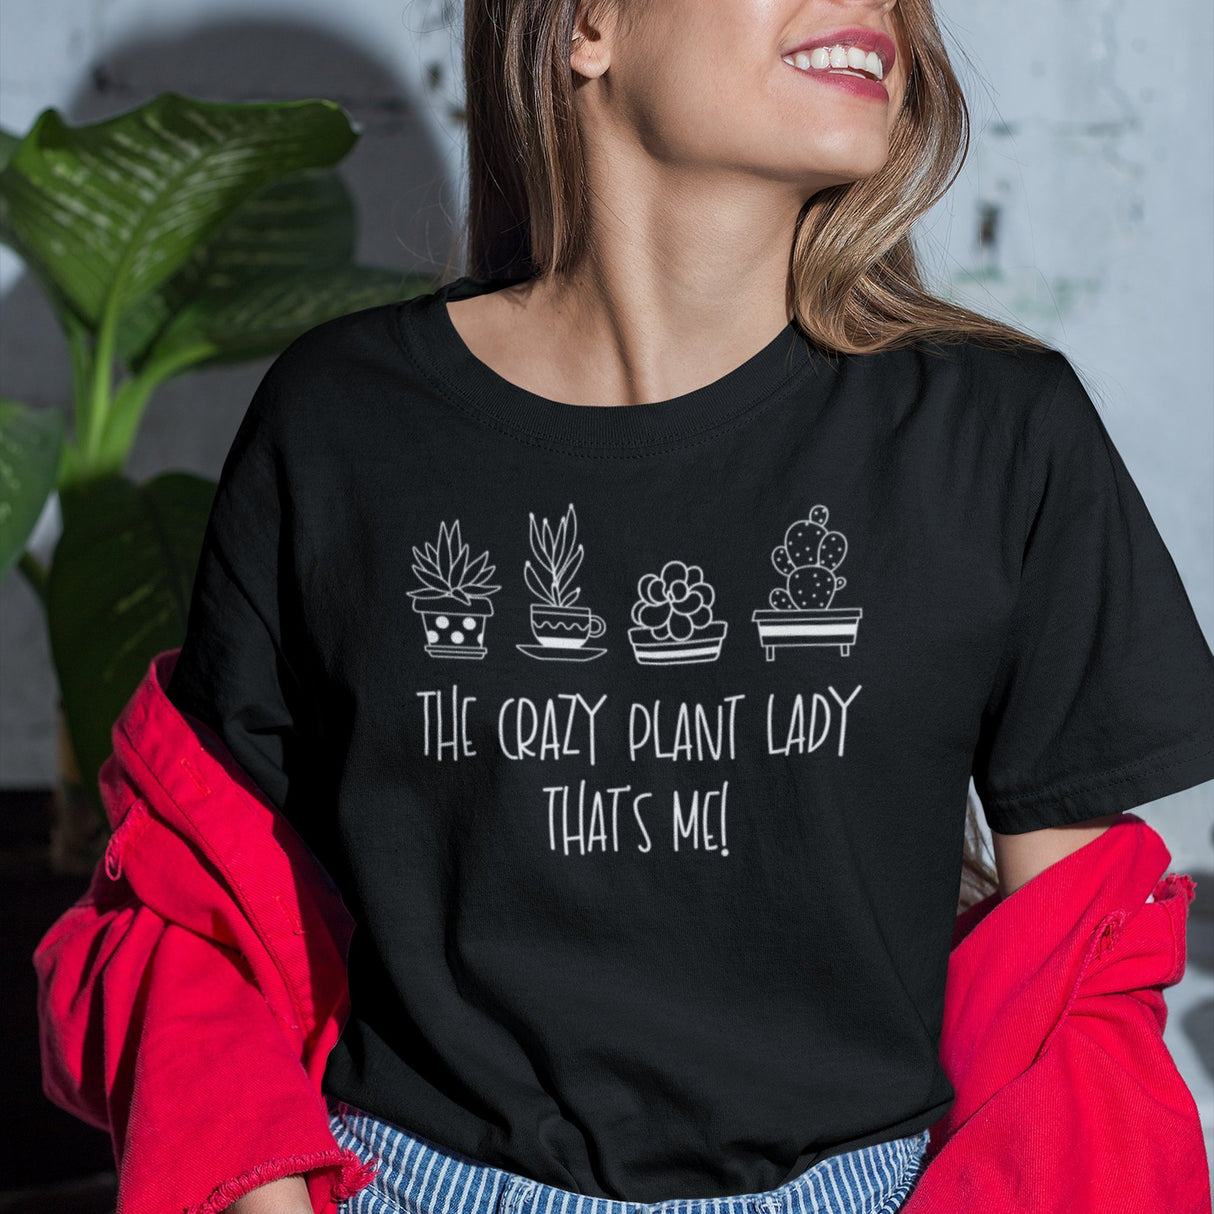 crazy-plant-lady-crazy-tee-plant-t-shirt-lady-tee-t-shirt-tee#color_black